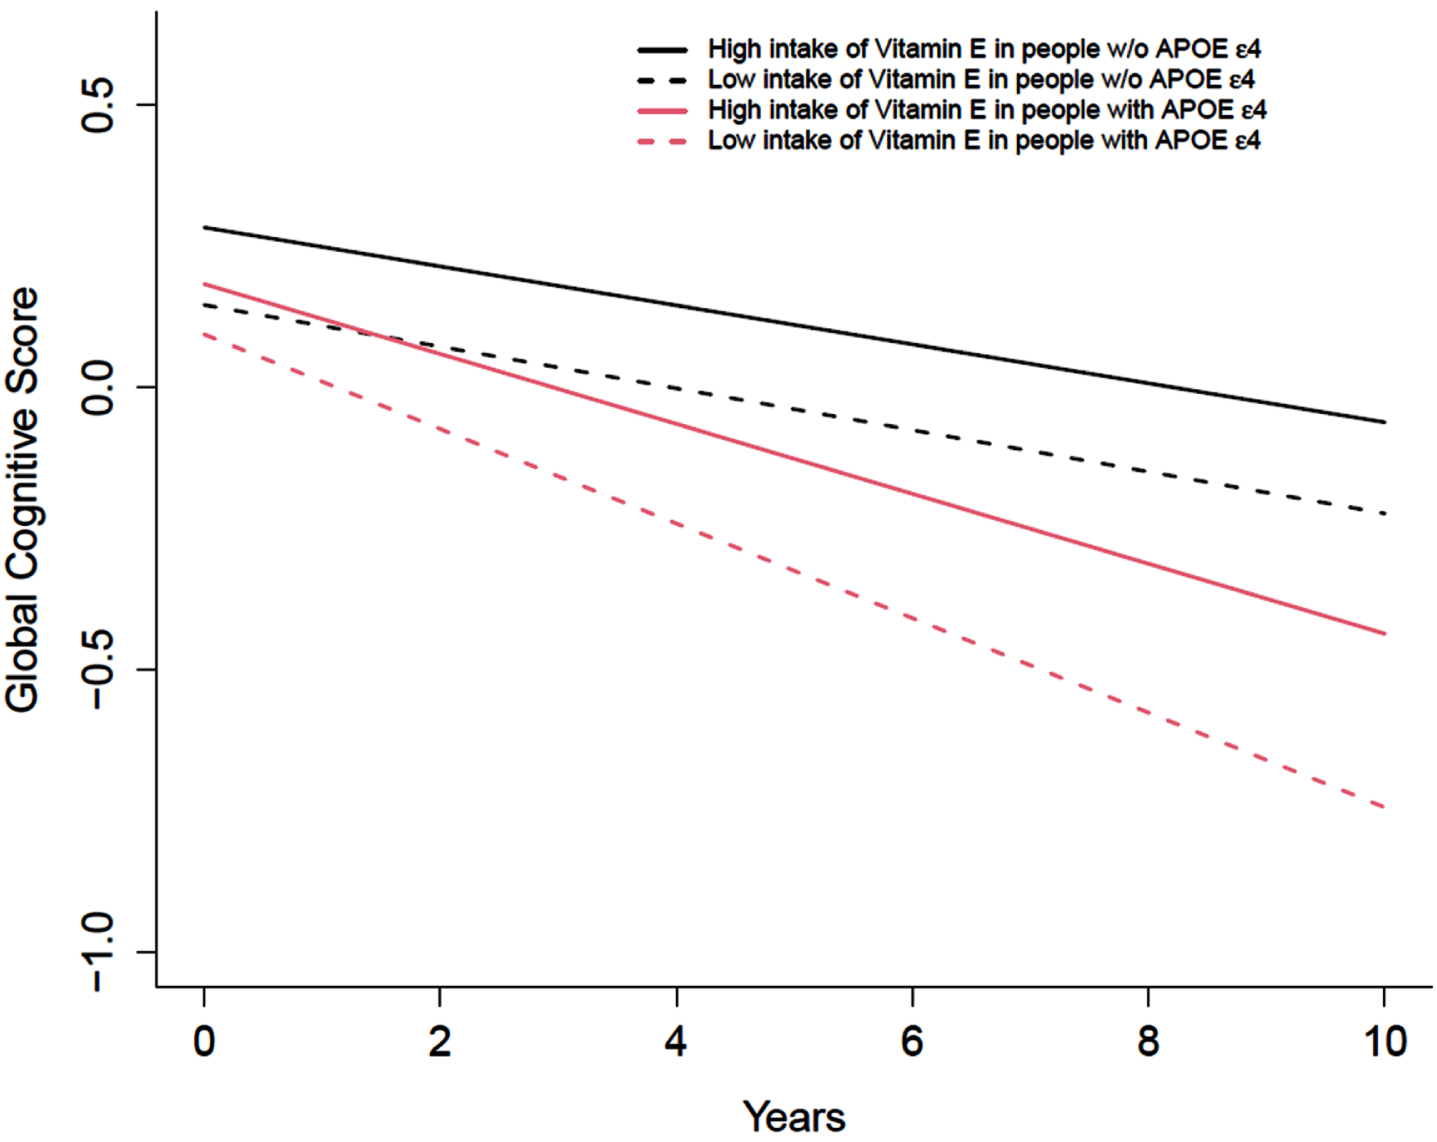 Intakes of total vitamin E from food sources only and annual change of cognitive function among participants with or without APOE ɛ4 allele (n = 2,193). The intakes of total vitamin E from food sources were categorized into quintiles, with the lowest quintile as the referent group. Red dash line and the solid line represent the lowest and highest quintile of total vitamin E intake among participants with APOE ɛ4 allele. Black dash line and the solid line represent the lowest and highest quintile of total vitamin E intake among participants without APOE ɛ4 allele. Model was adjusted for age (years), sex (F/M), education (years), calorie (kcal), smoking status (current, former), race, and their respective interactions with time.